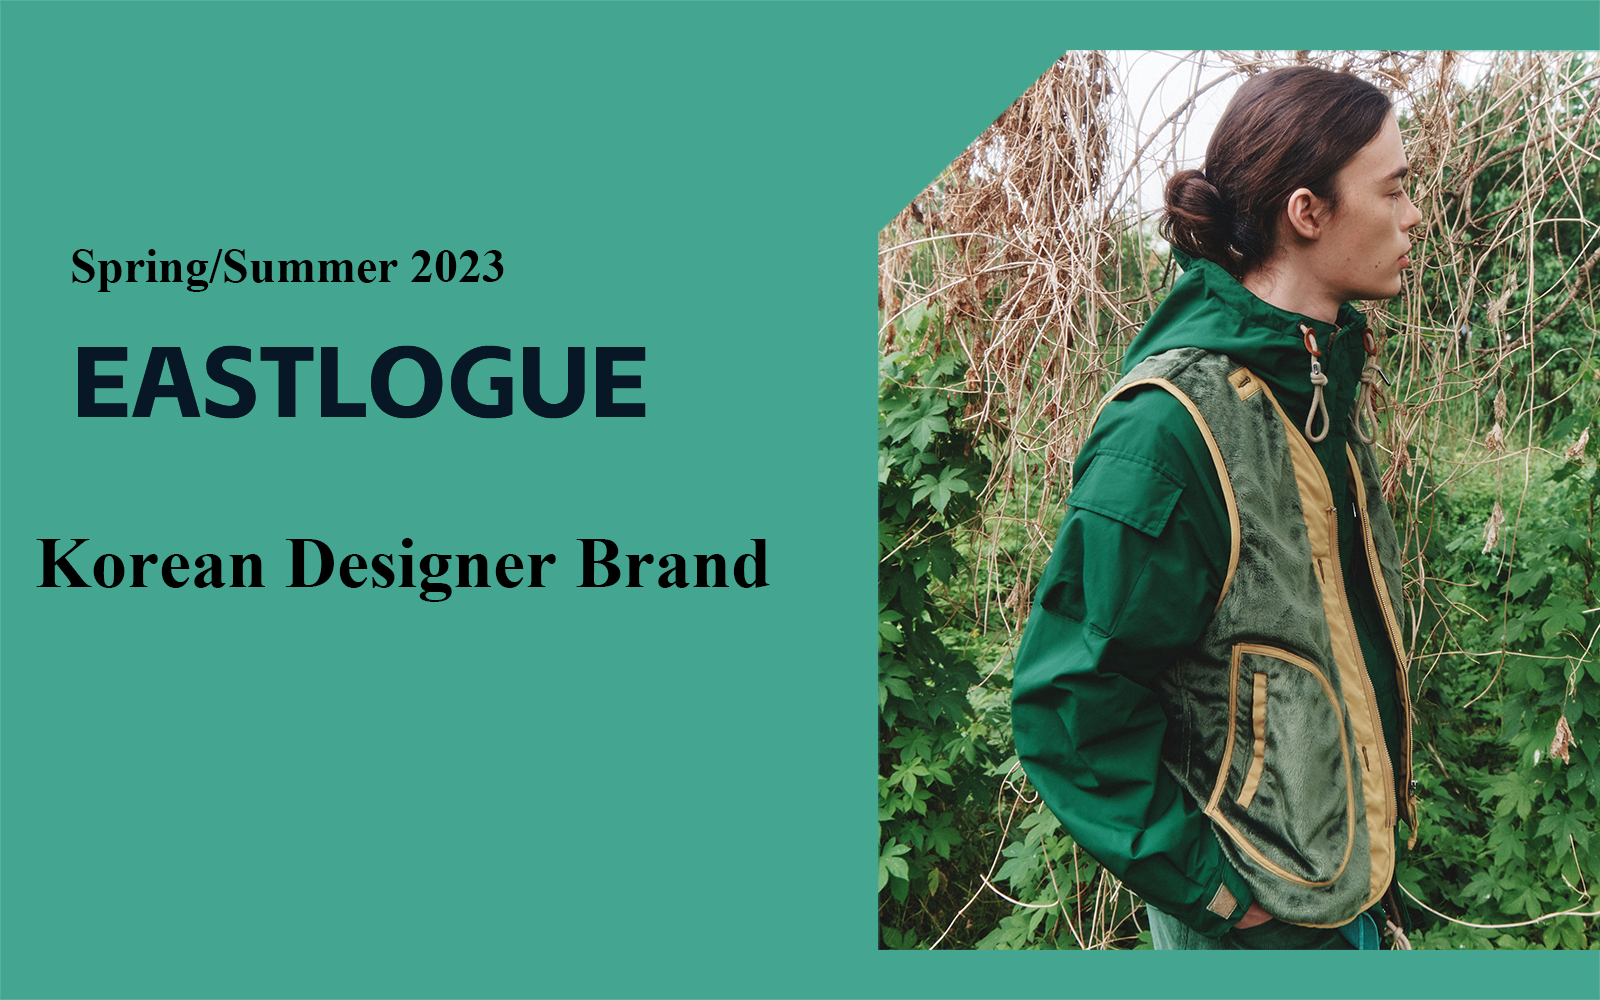 Outdoor Daily -- The Analysis of Eastlogue The Menswear Designer Brand